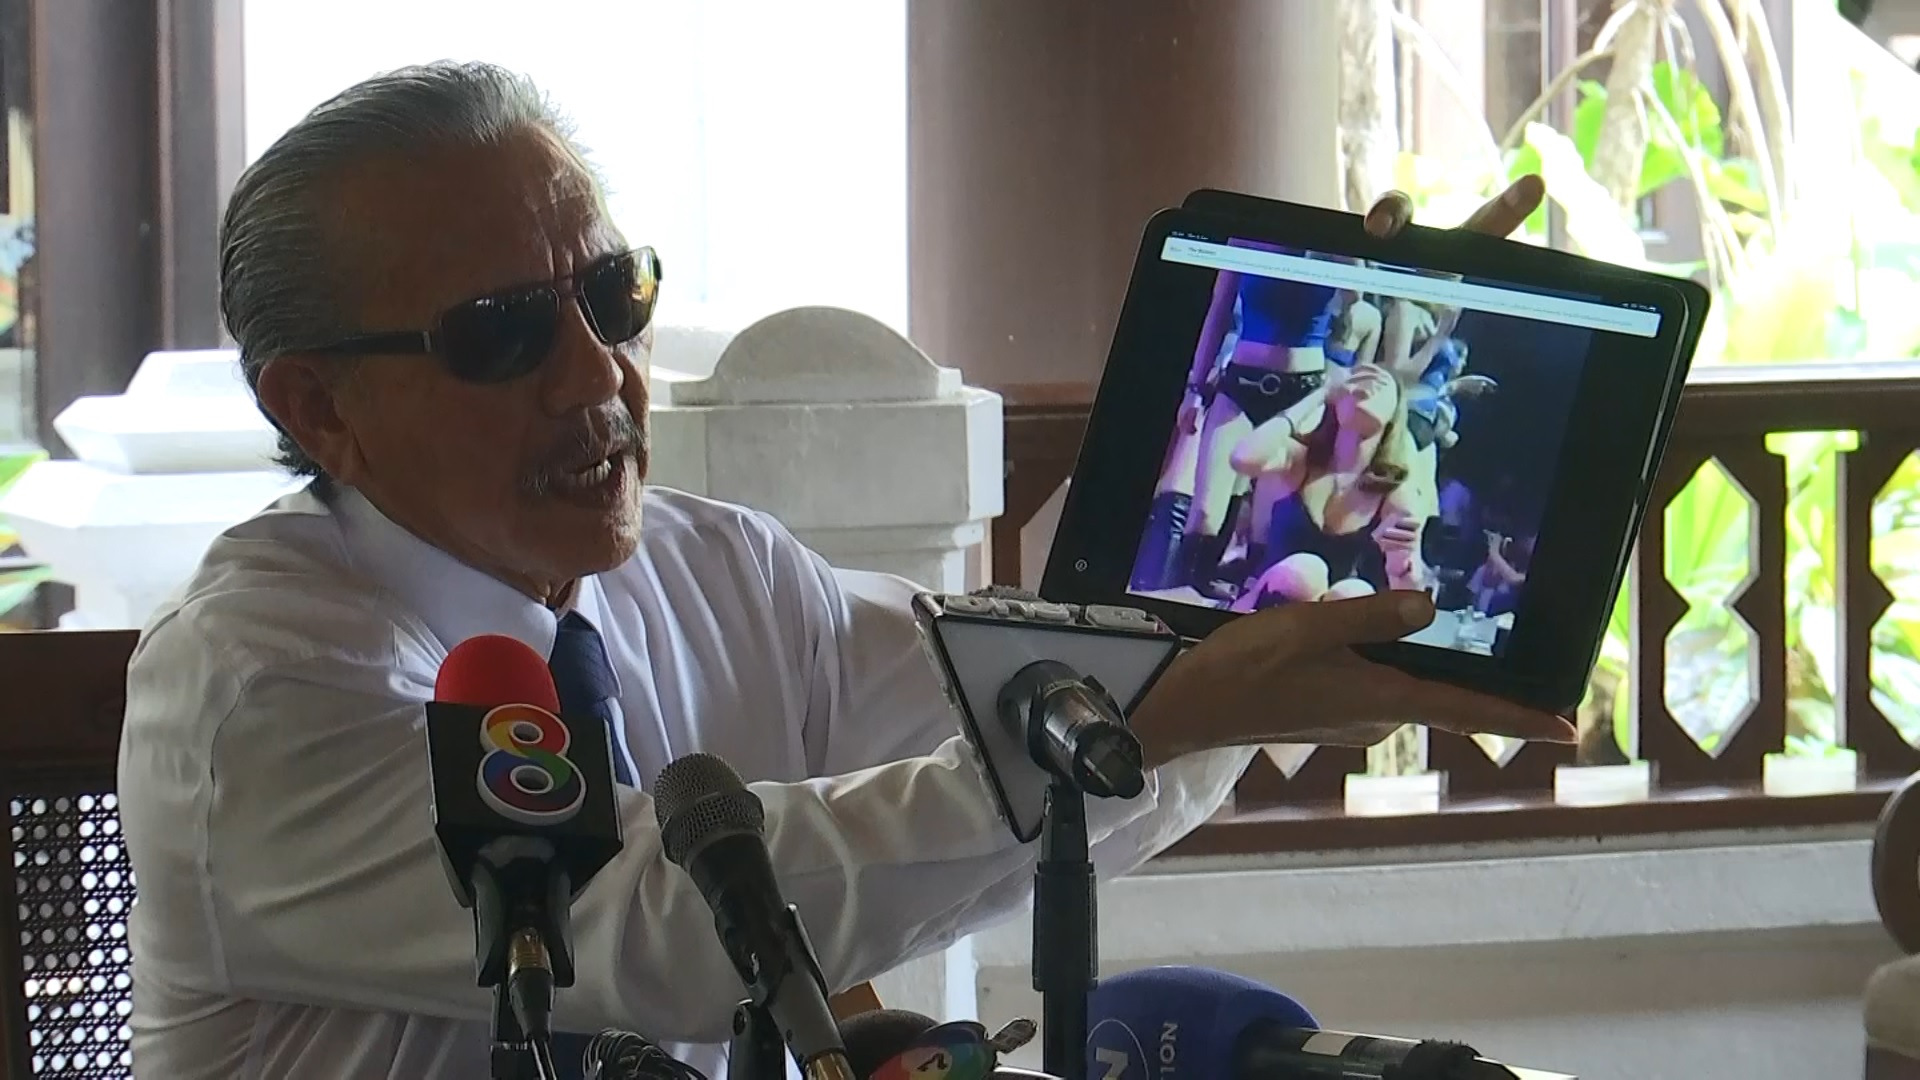 Former politician Chuvit Kamolvisit shows a video clip of showgirls at the Krystal Club on Thursday at a news conference.
